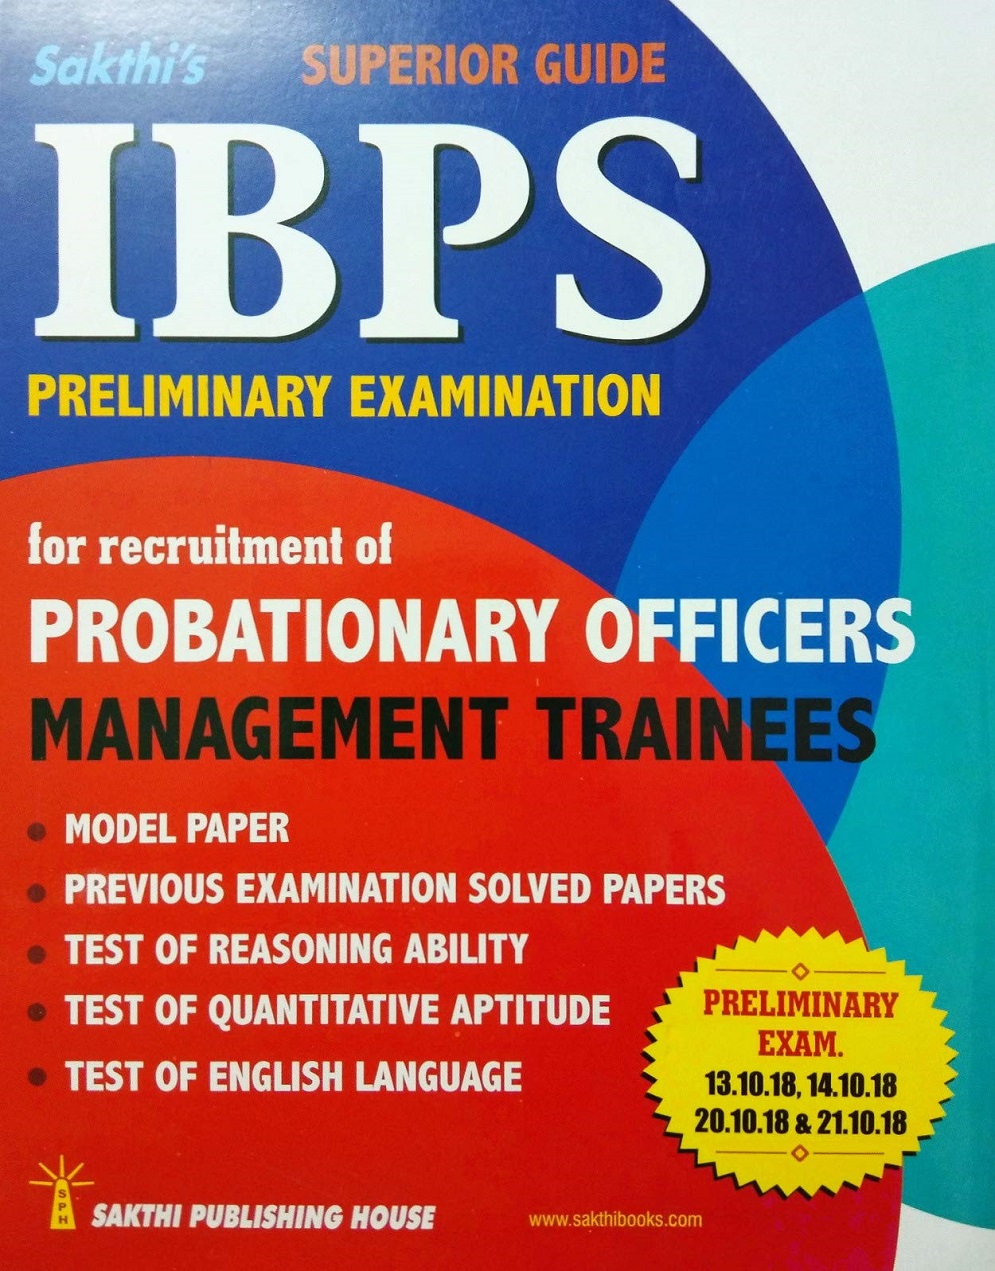 buy-ibps-preliminary-examination-guide-for-recruitment-of-probationary-officers-management